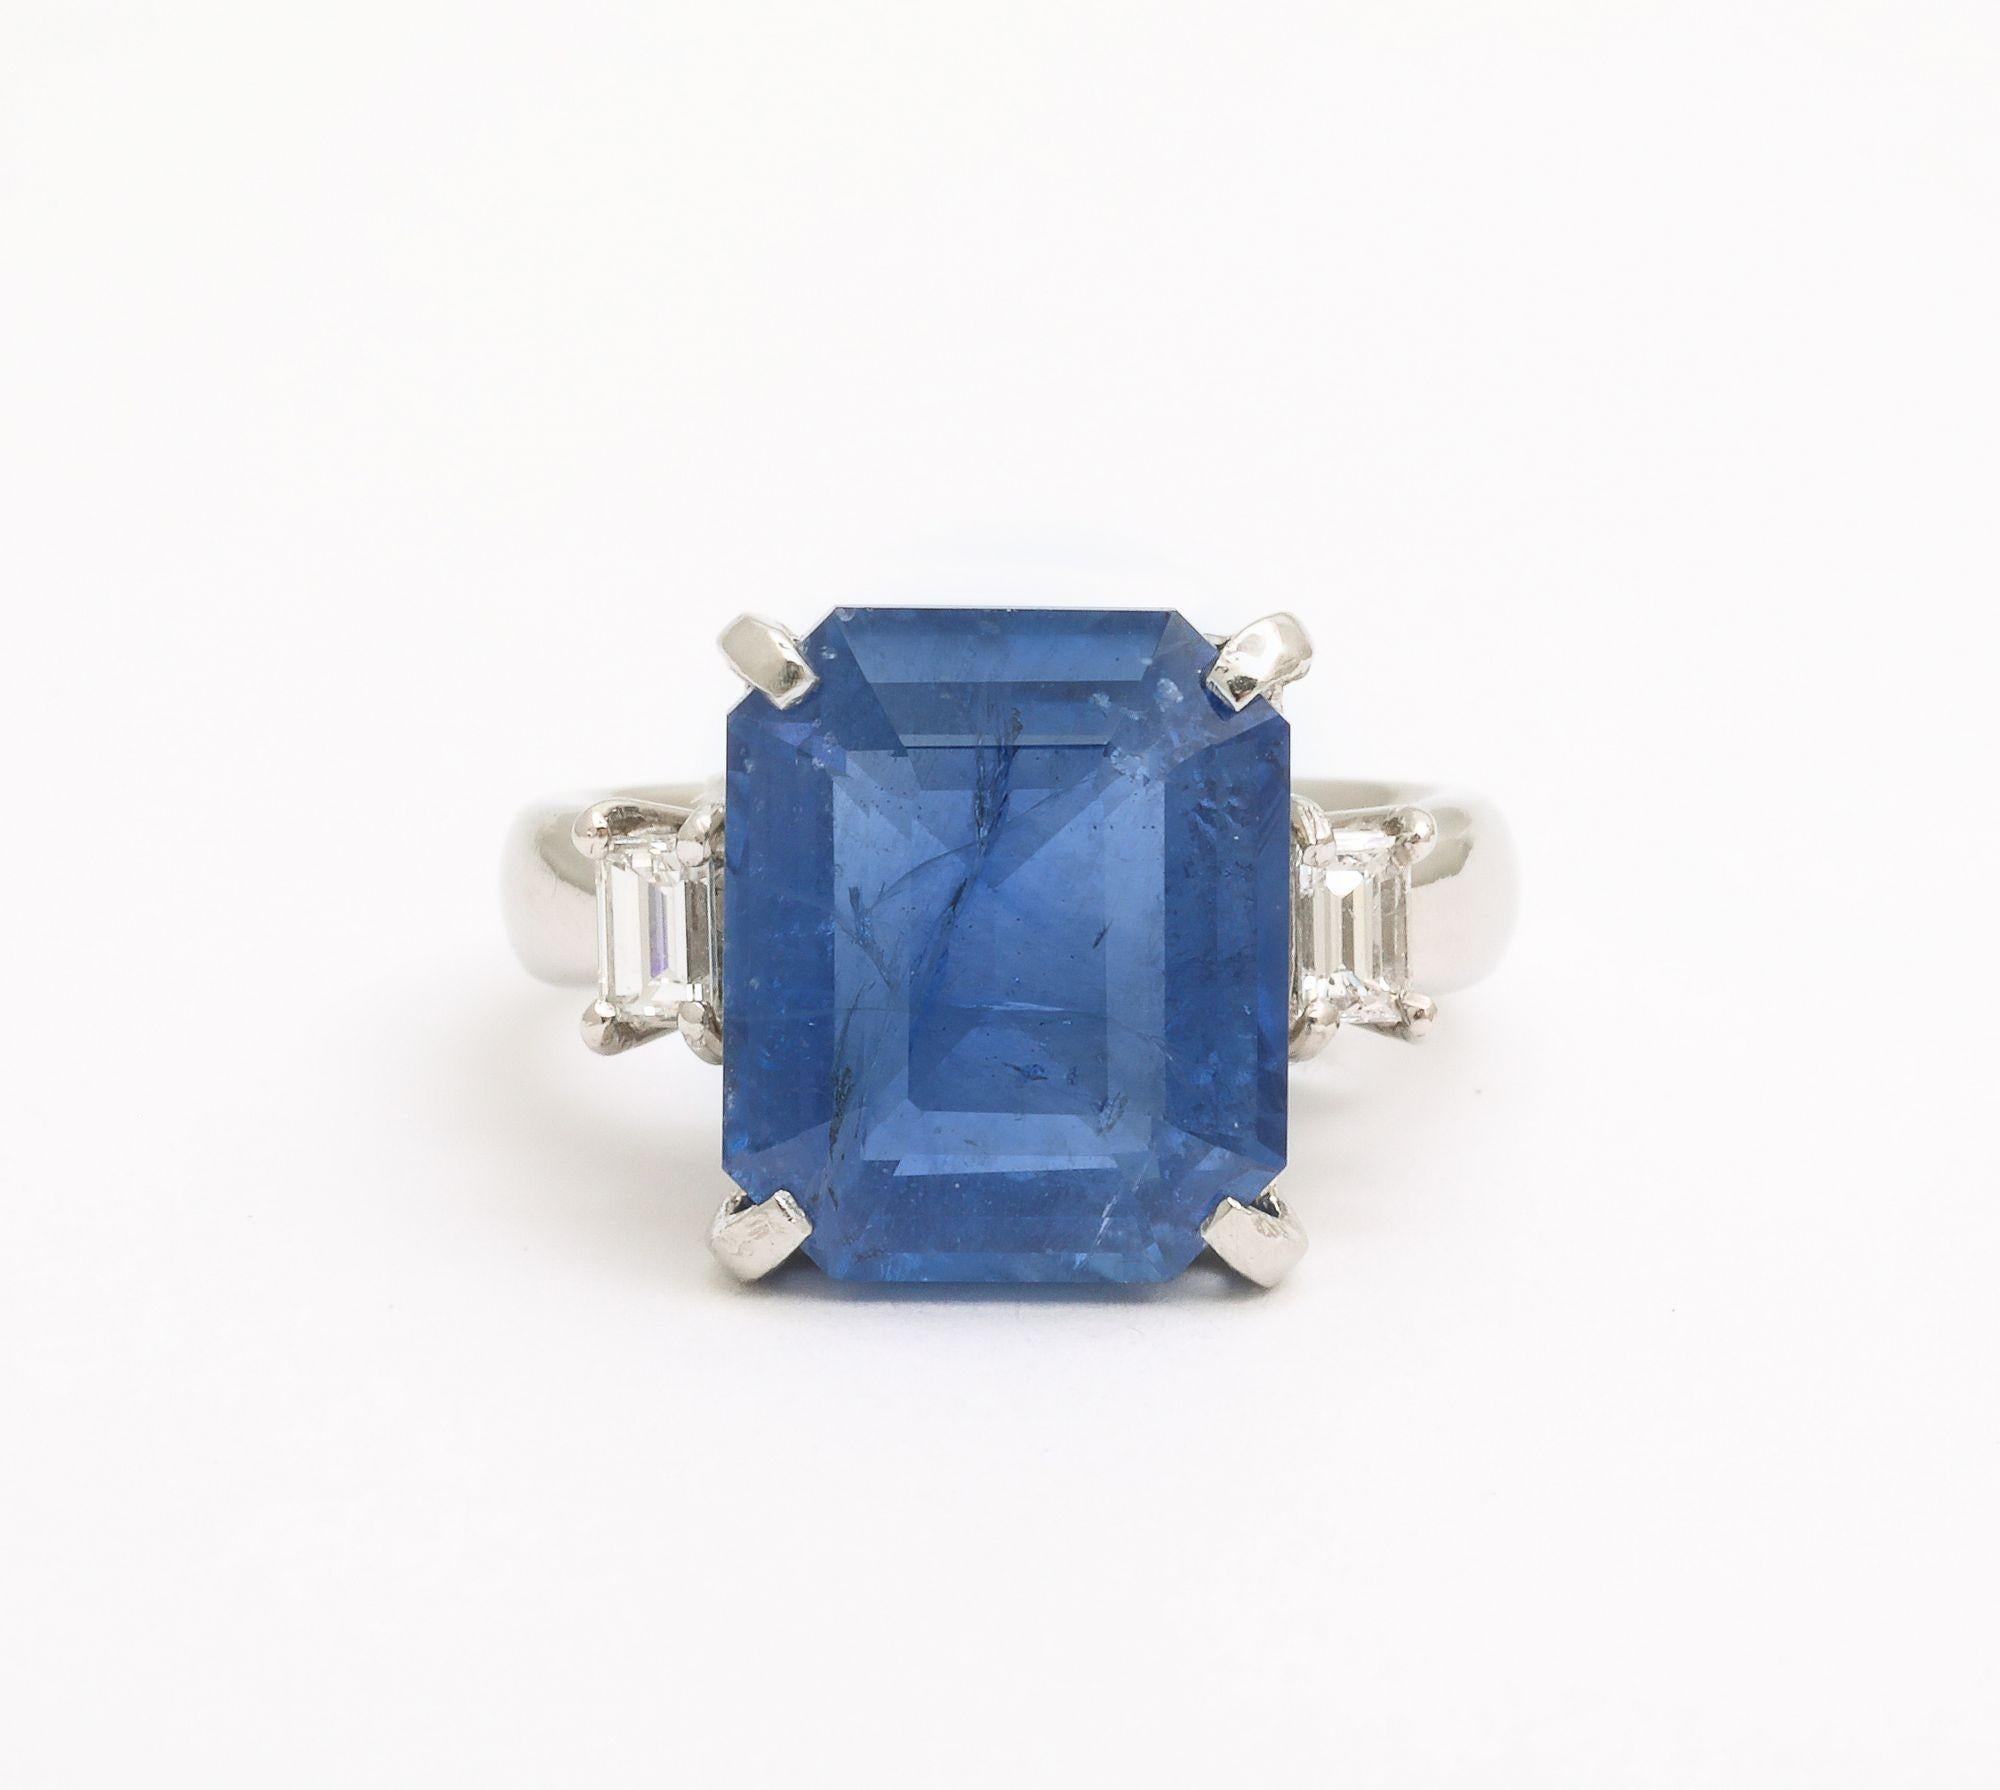 A fabulous Art Deco Octagonal 10 ct Ceylon Sapphire Engagement Ring with Diamond Baguettes. A natural Ceylon 10 ct octagonal cut with visible inclusions flanked by emerald cut diamonds on Platinum mount. Certificate available GIA Sapphire Origin